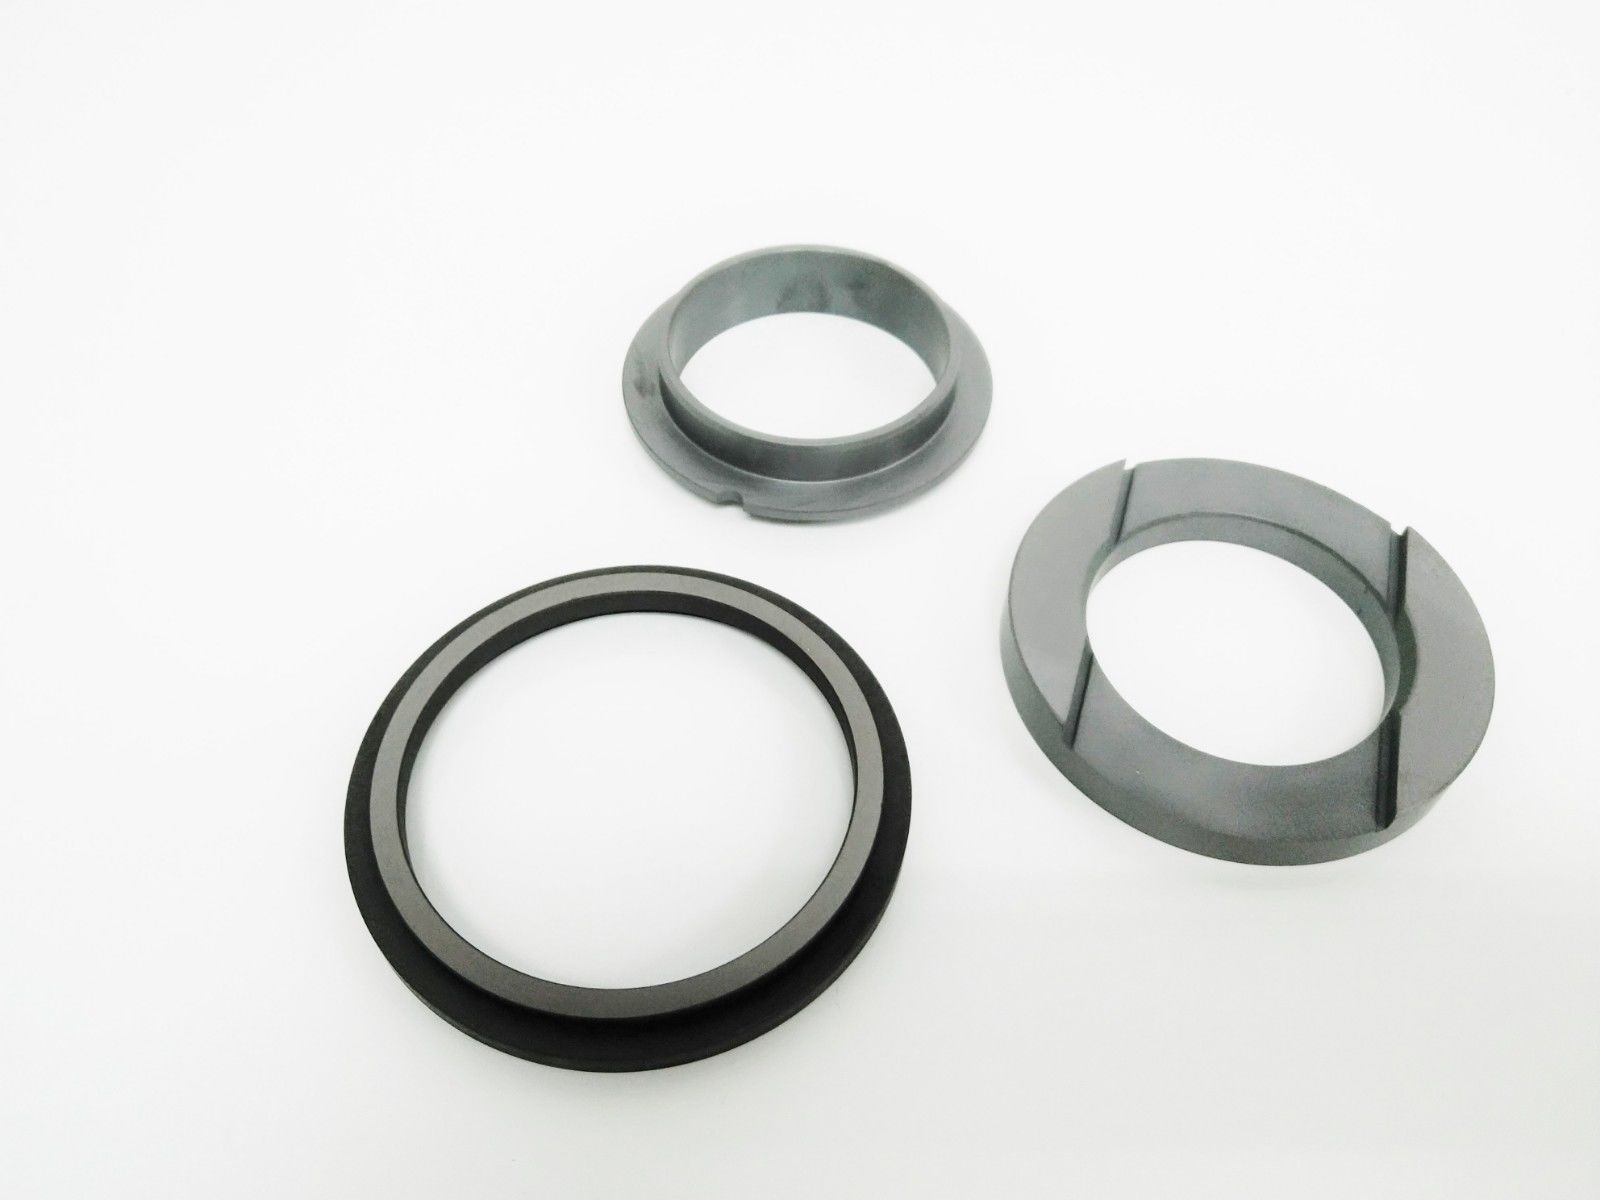 Lepu Breathable fristam pump parts for wholesale for high-pressure applications